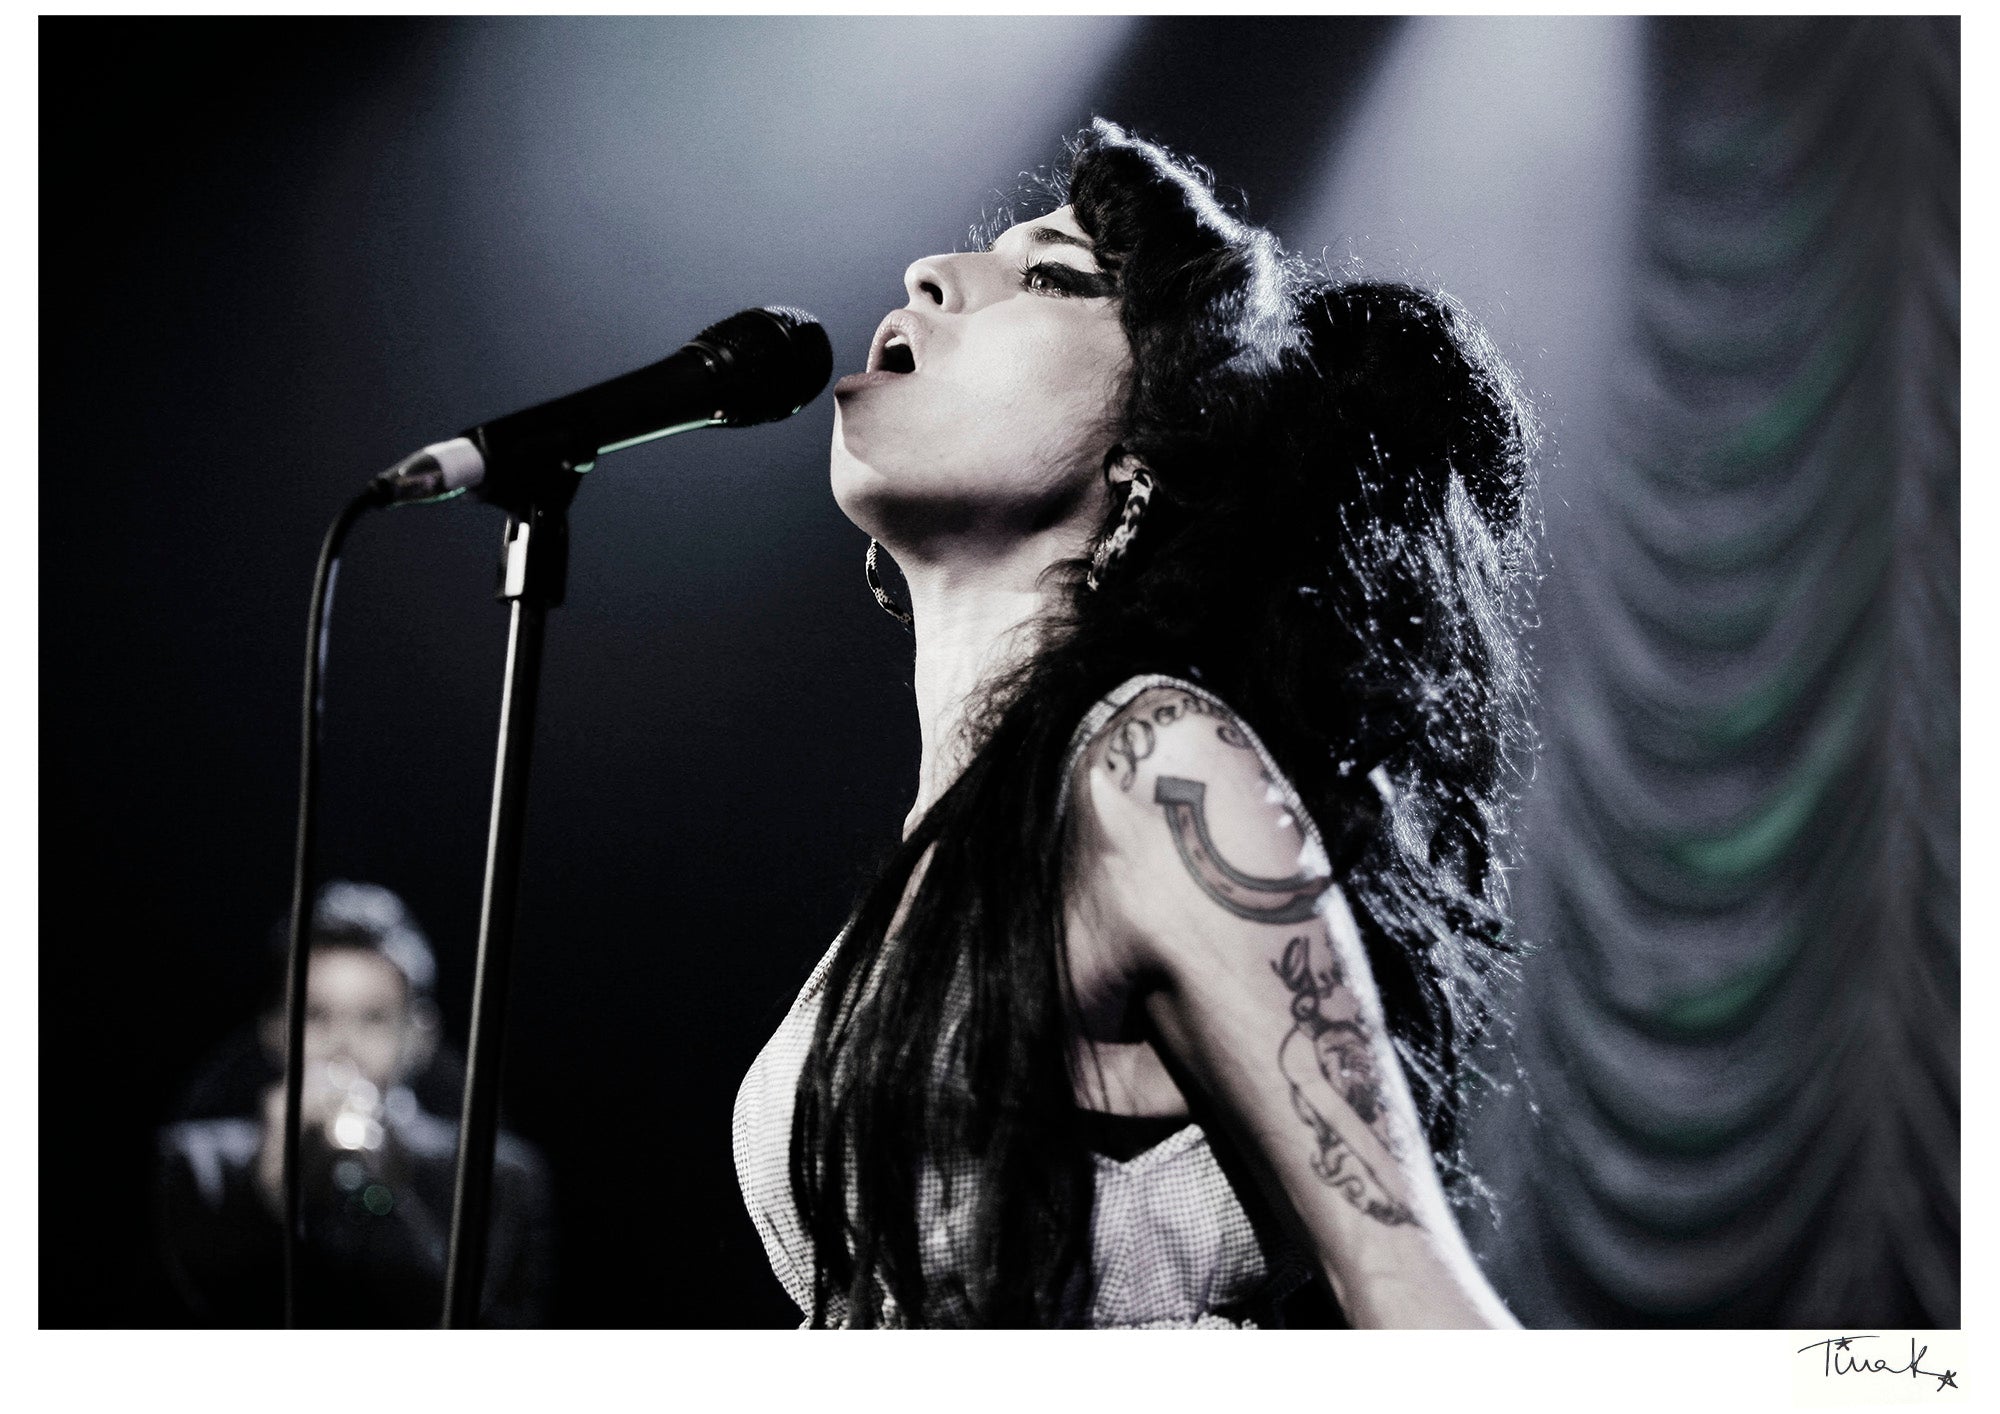 Unframed music wall art print of singer Amy Winehouse performing onstage at Shepherd's Bush Empire in 2007